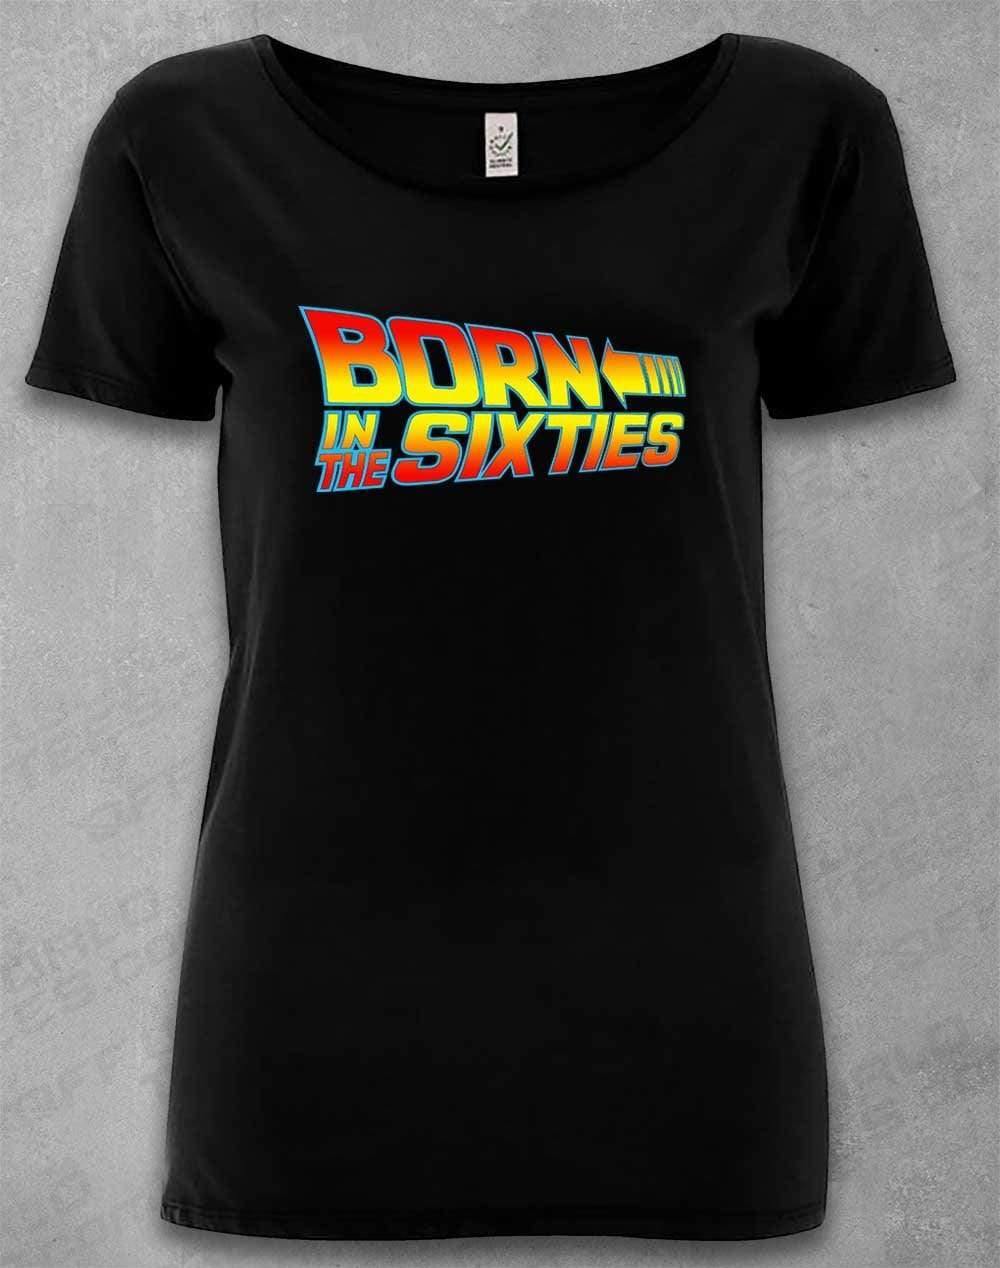 DELUXE Born in the... (CHOOSE YOUR DECADE!) Organic Scoop Neck T-Shirt 1960s - Black / 8-10  - Off World Tees